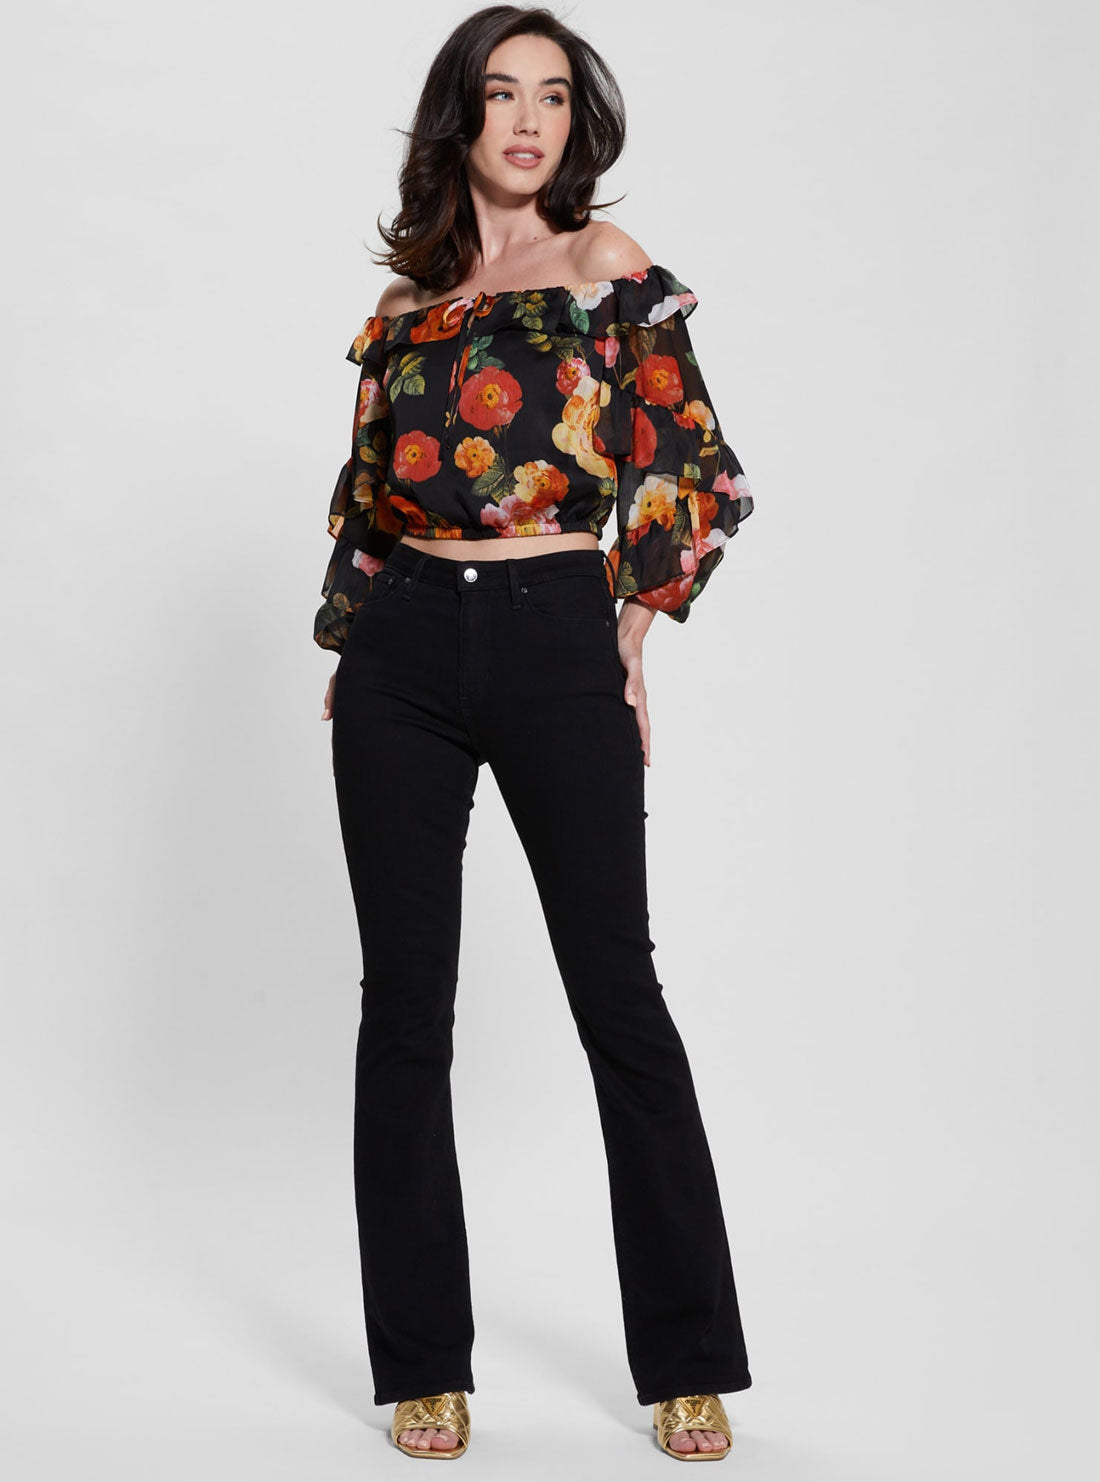 GUESS Black Floral Shani Ruffle Top full view